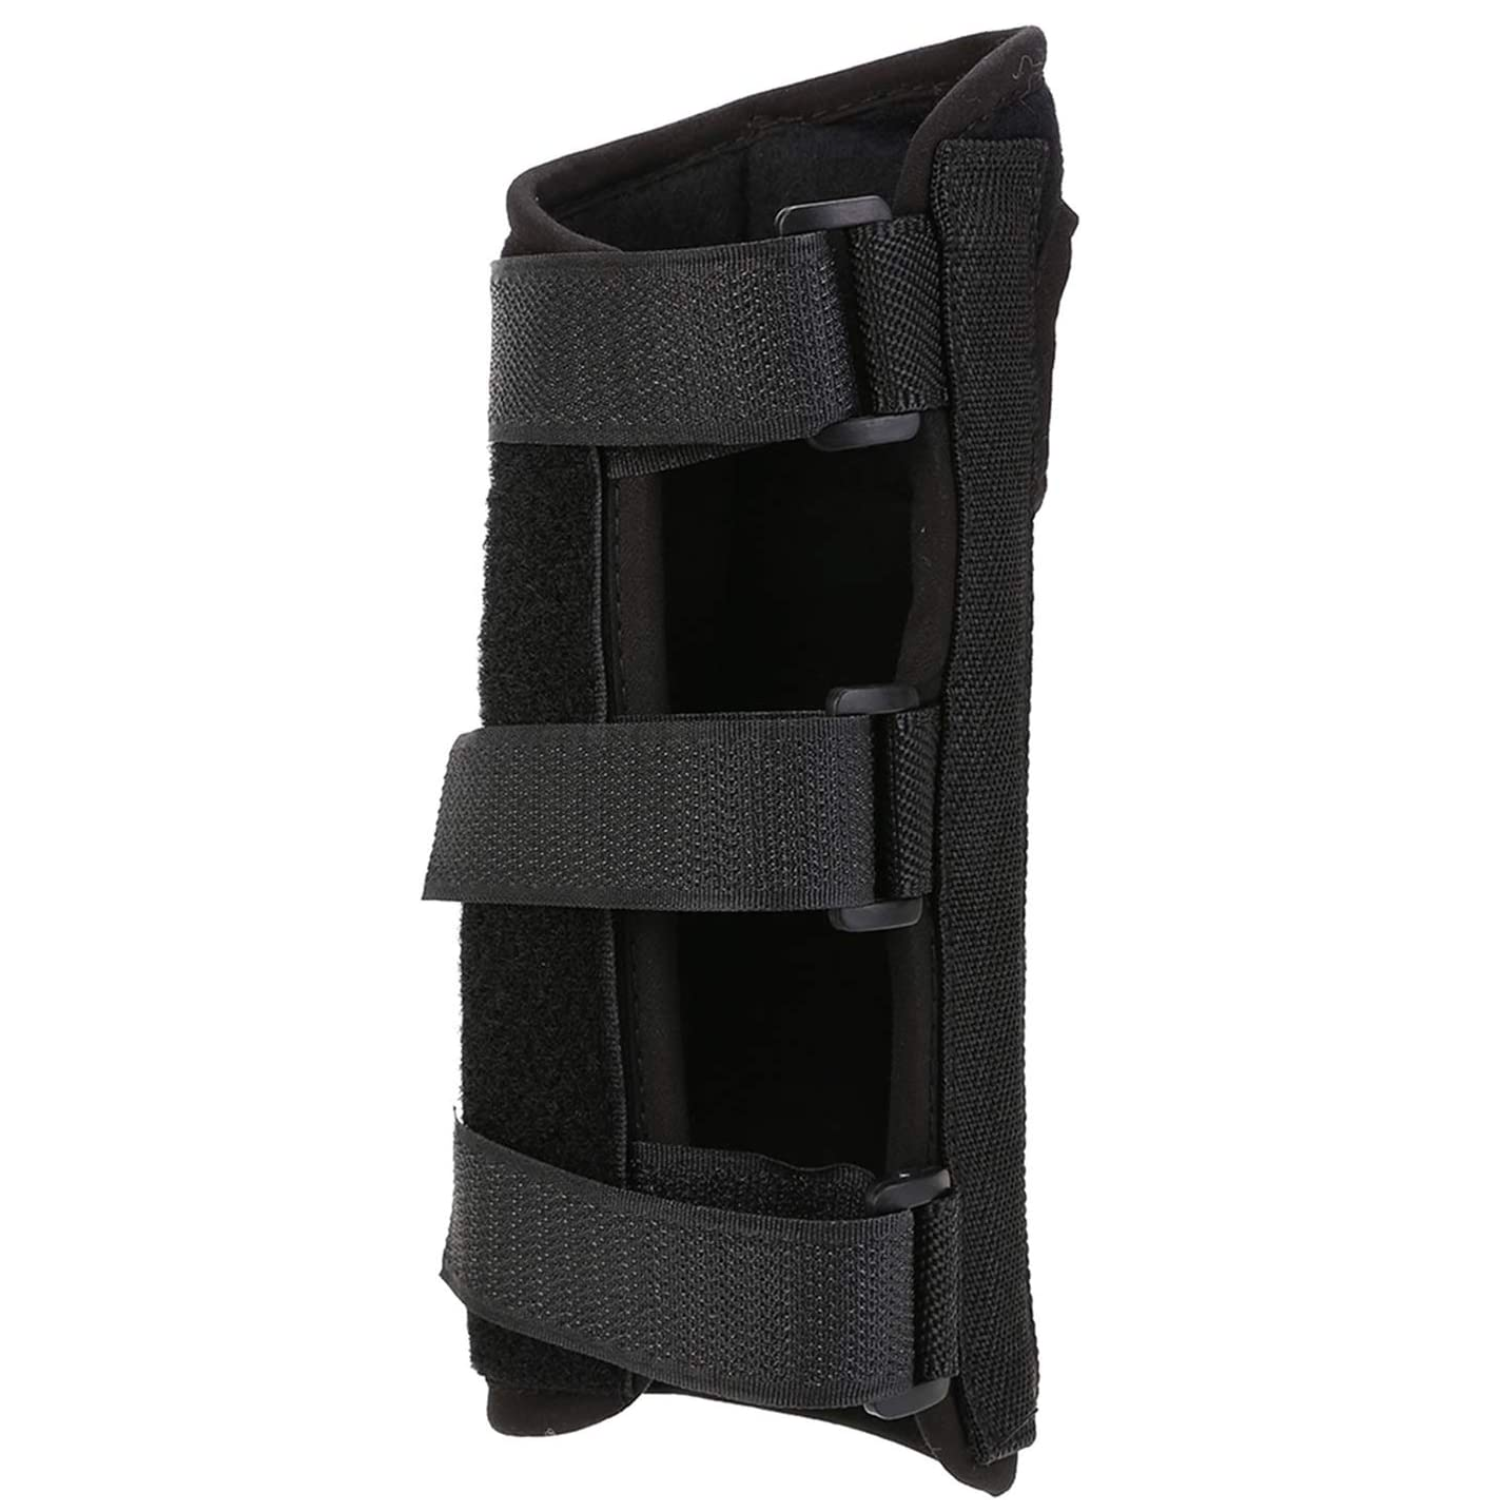 arm compression hand support for injuries